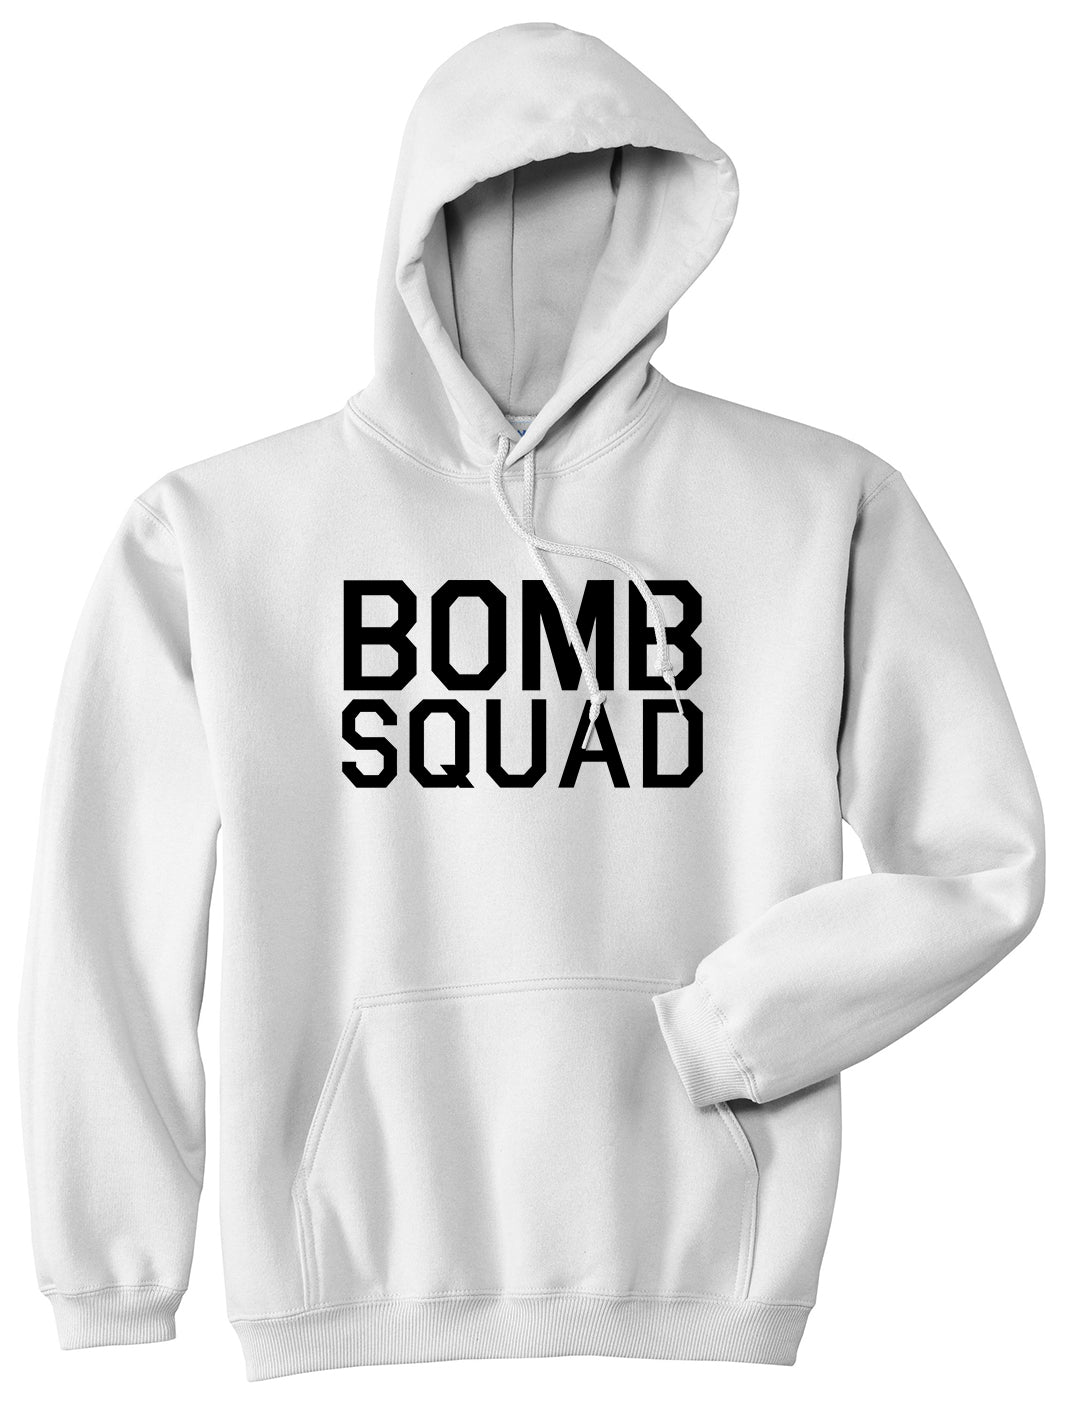 Bomb Squad White Pullover Hoodie by Kings Of NY